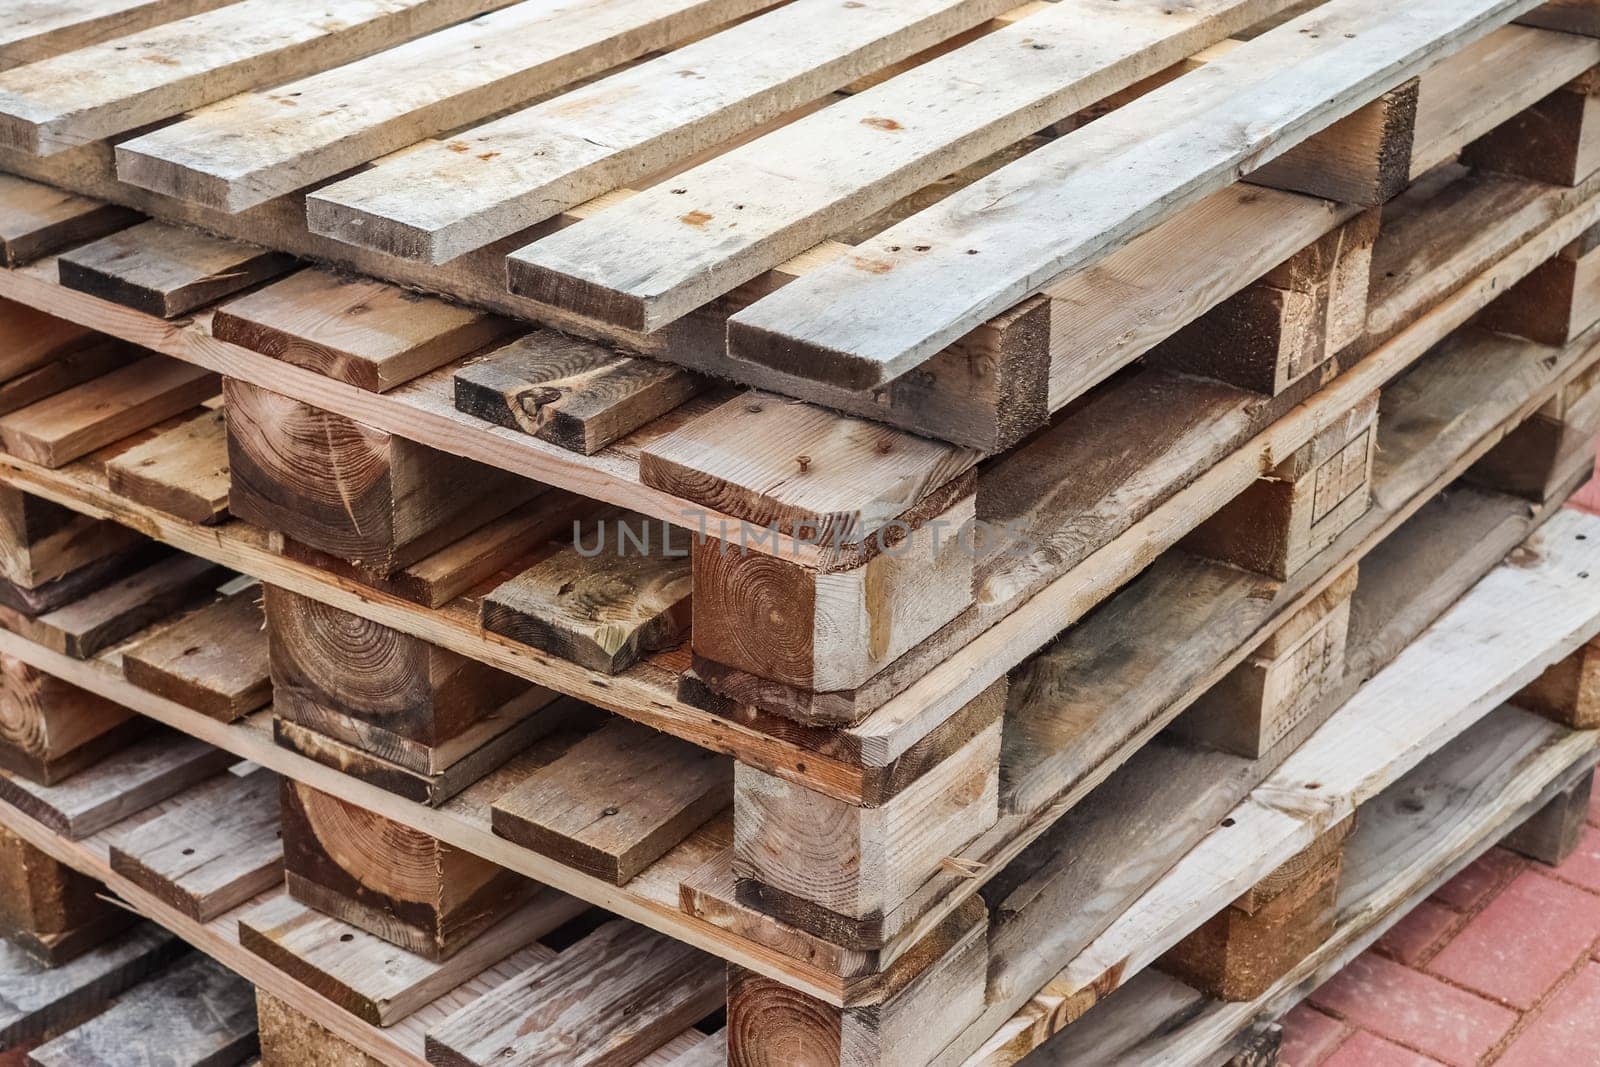 Close up view of a stack of wooden pallets